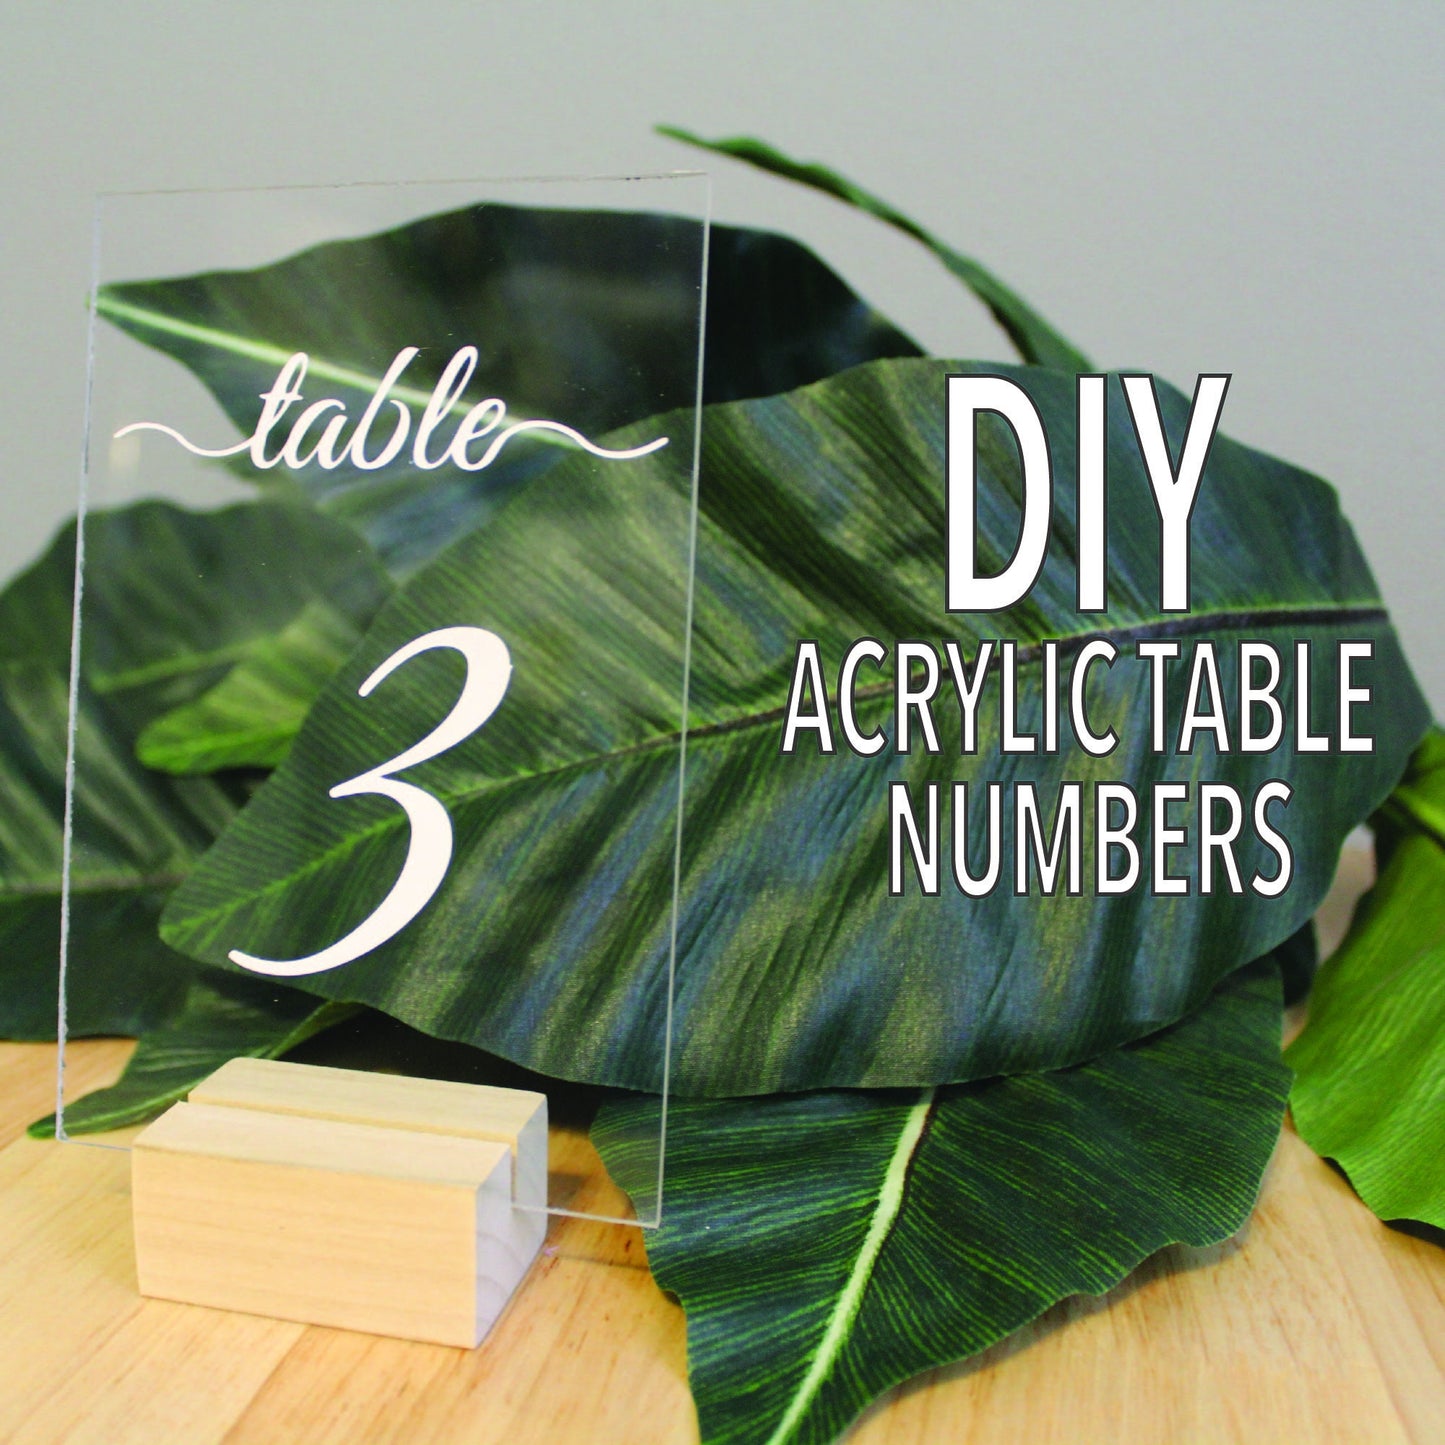 DIY Acrylic Table Number Signs Template & Instructions | Table Numbers 1-36 + head table